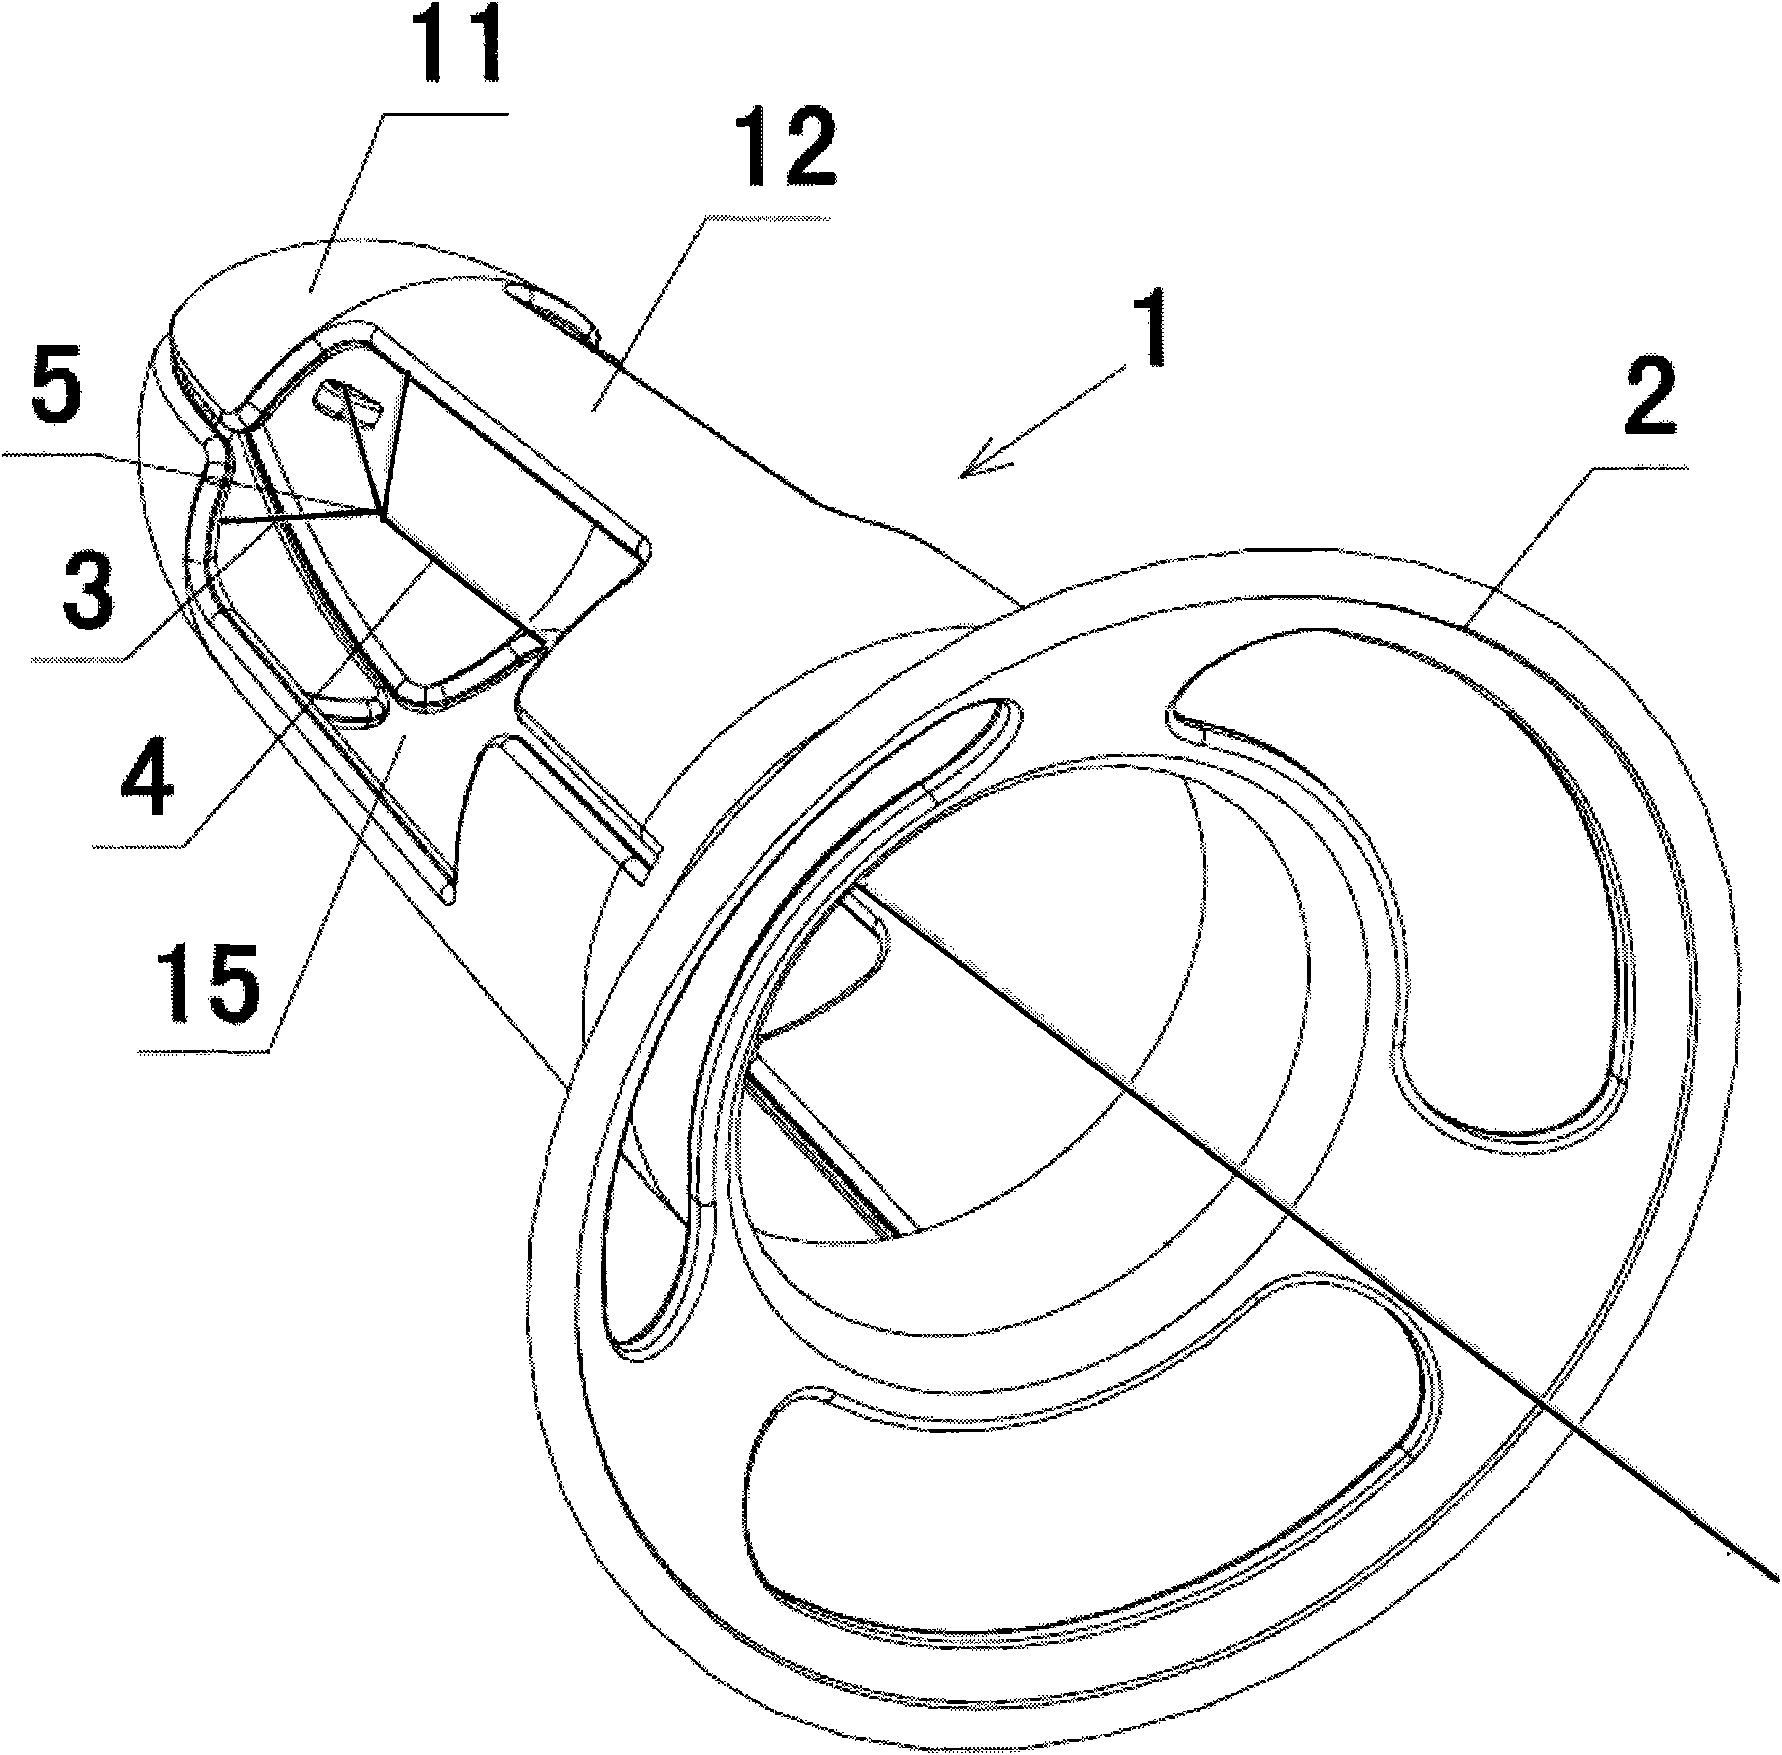 Anus dilatation device for surgical operation